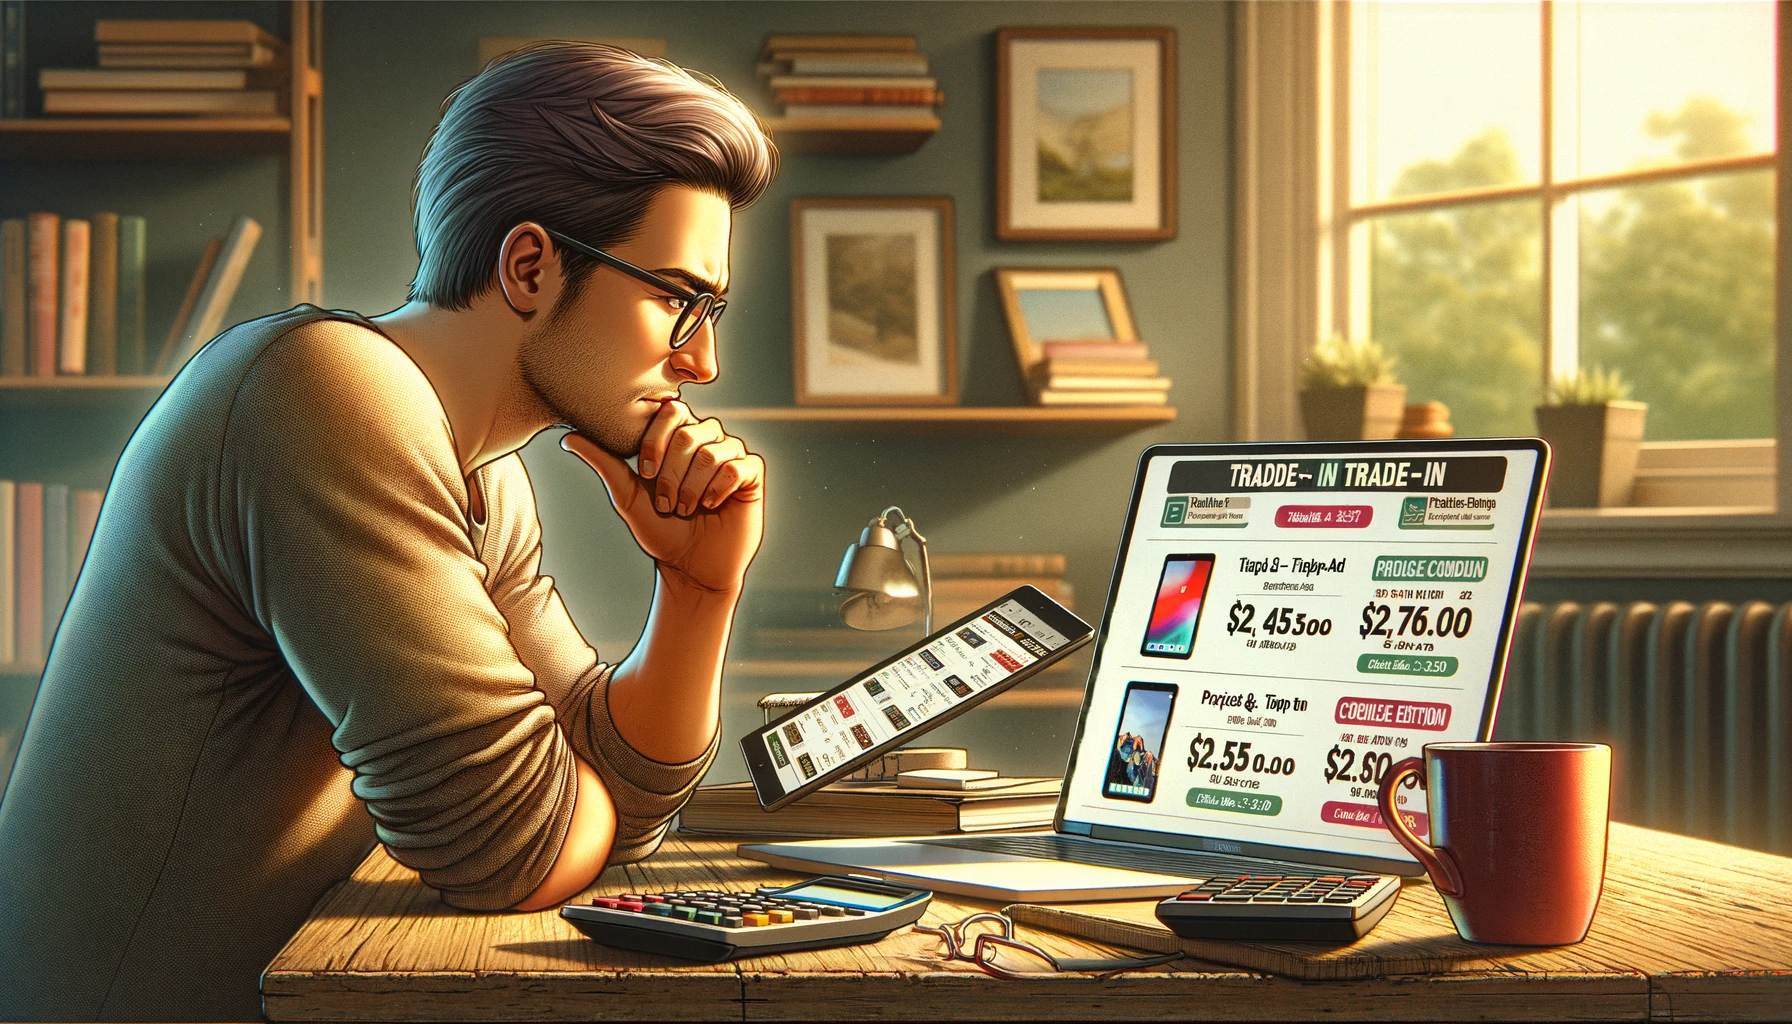 A young man contemplates various trade-in offers for his device on a tablet, with a thoughtful expression as sunlight streams through a nearby window.